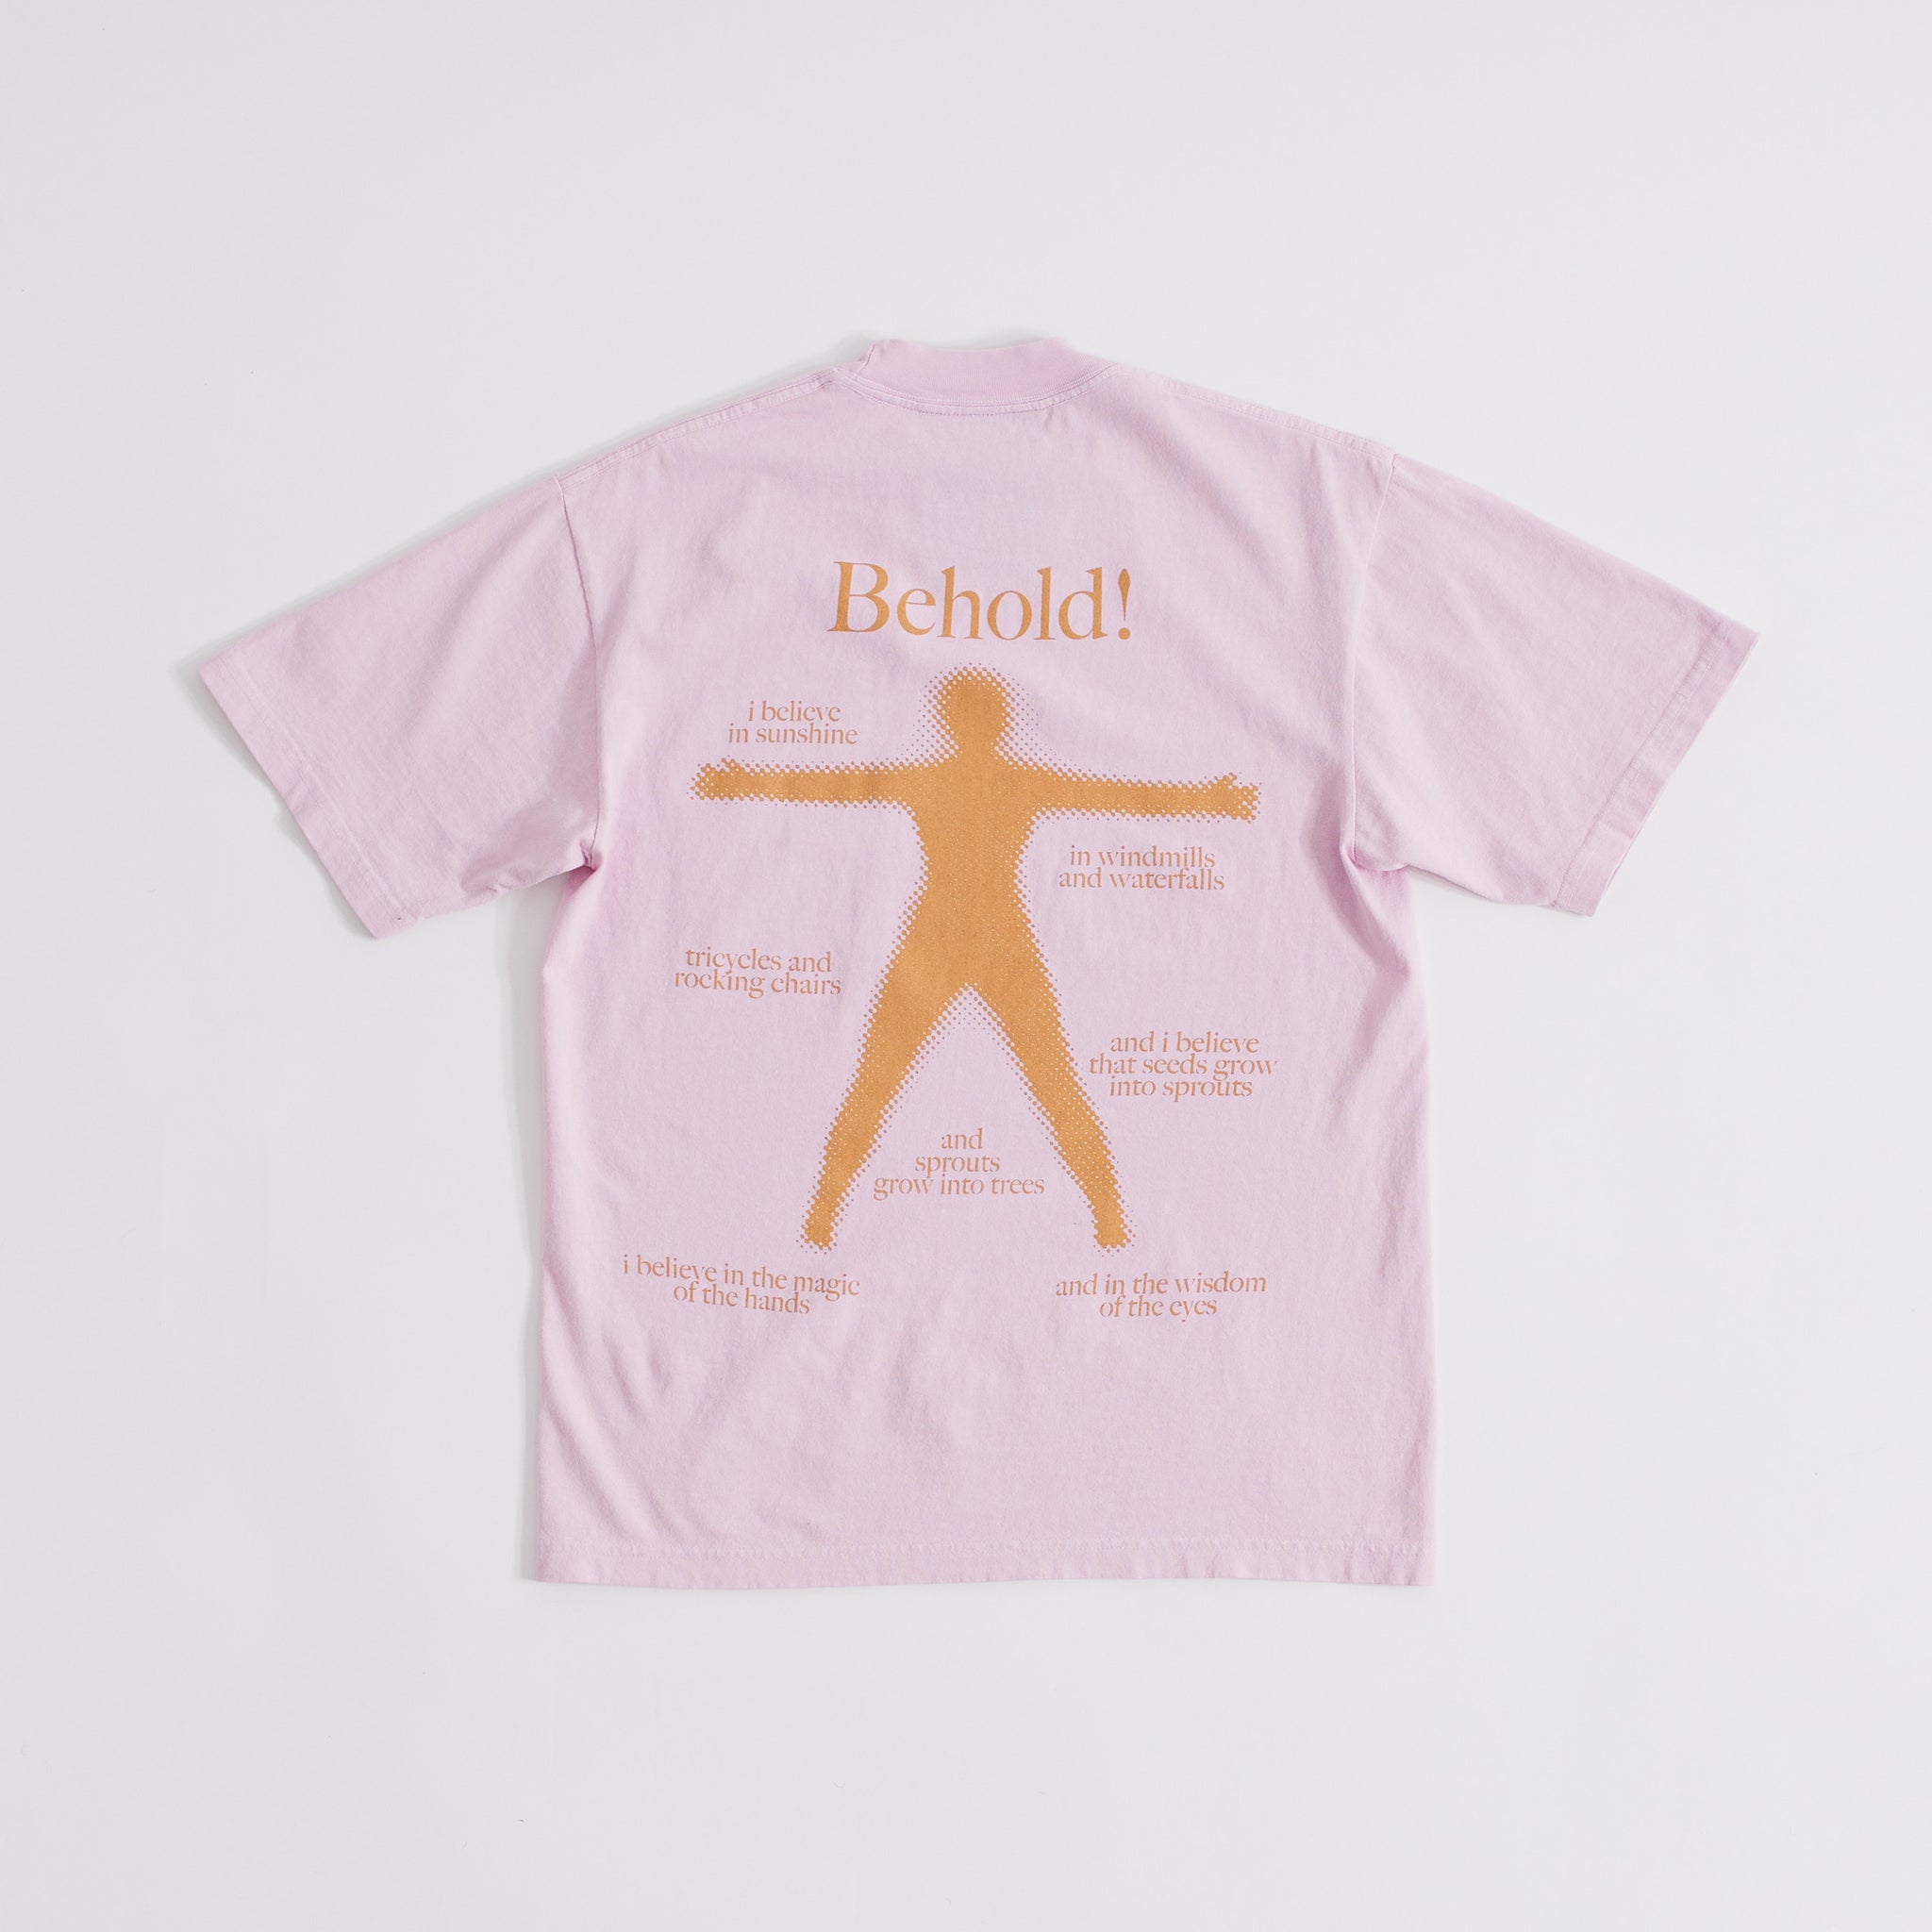 Behold! S/S T-Shirt (Pink)